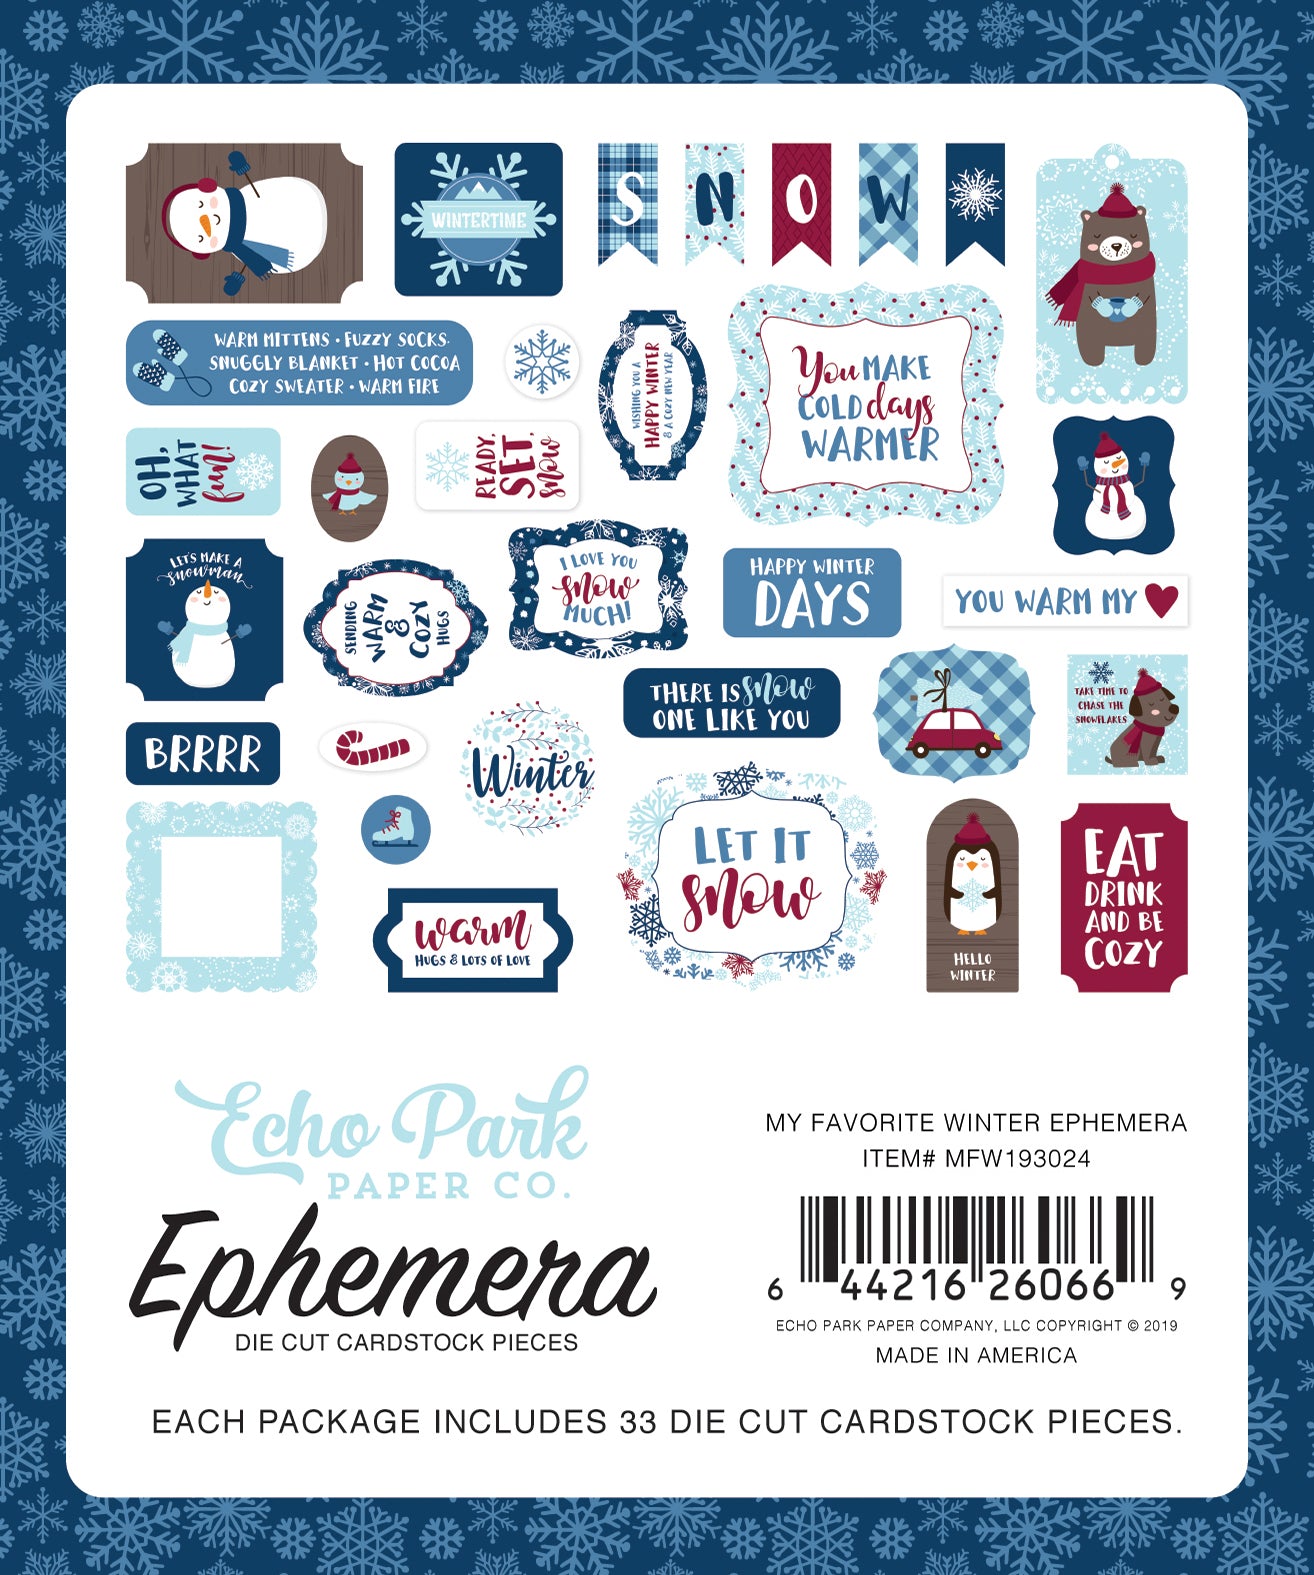 My Favorite Winter Ephemera Die Cut Cardstock Pack.  Pack includes 33 different die-cut shapes ready to embellish any project.